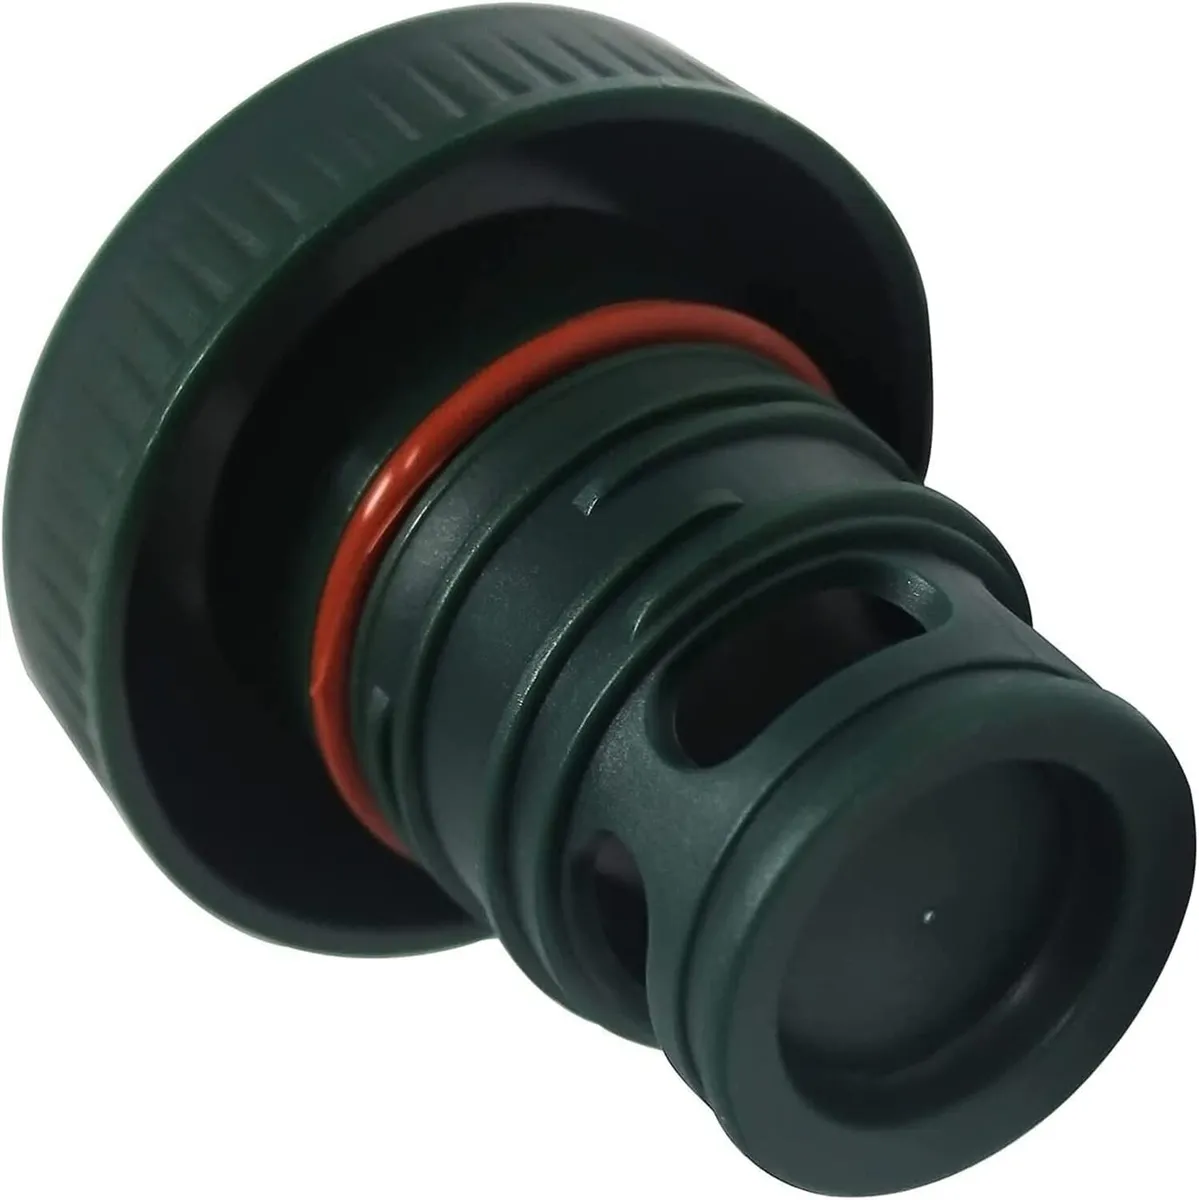 Parts Shop Replacement Thermos Stopper for Stanley Aladdin Vacuum